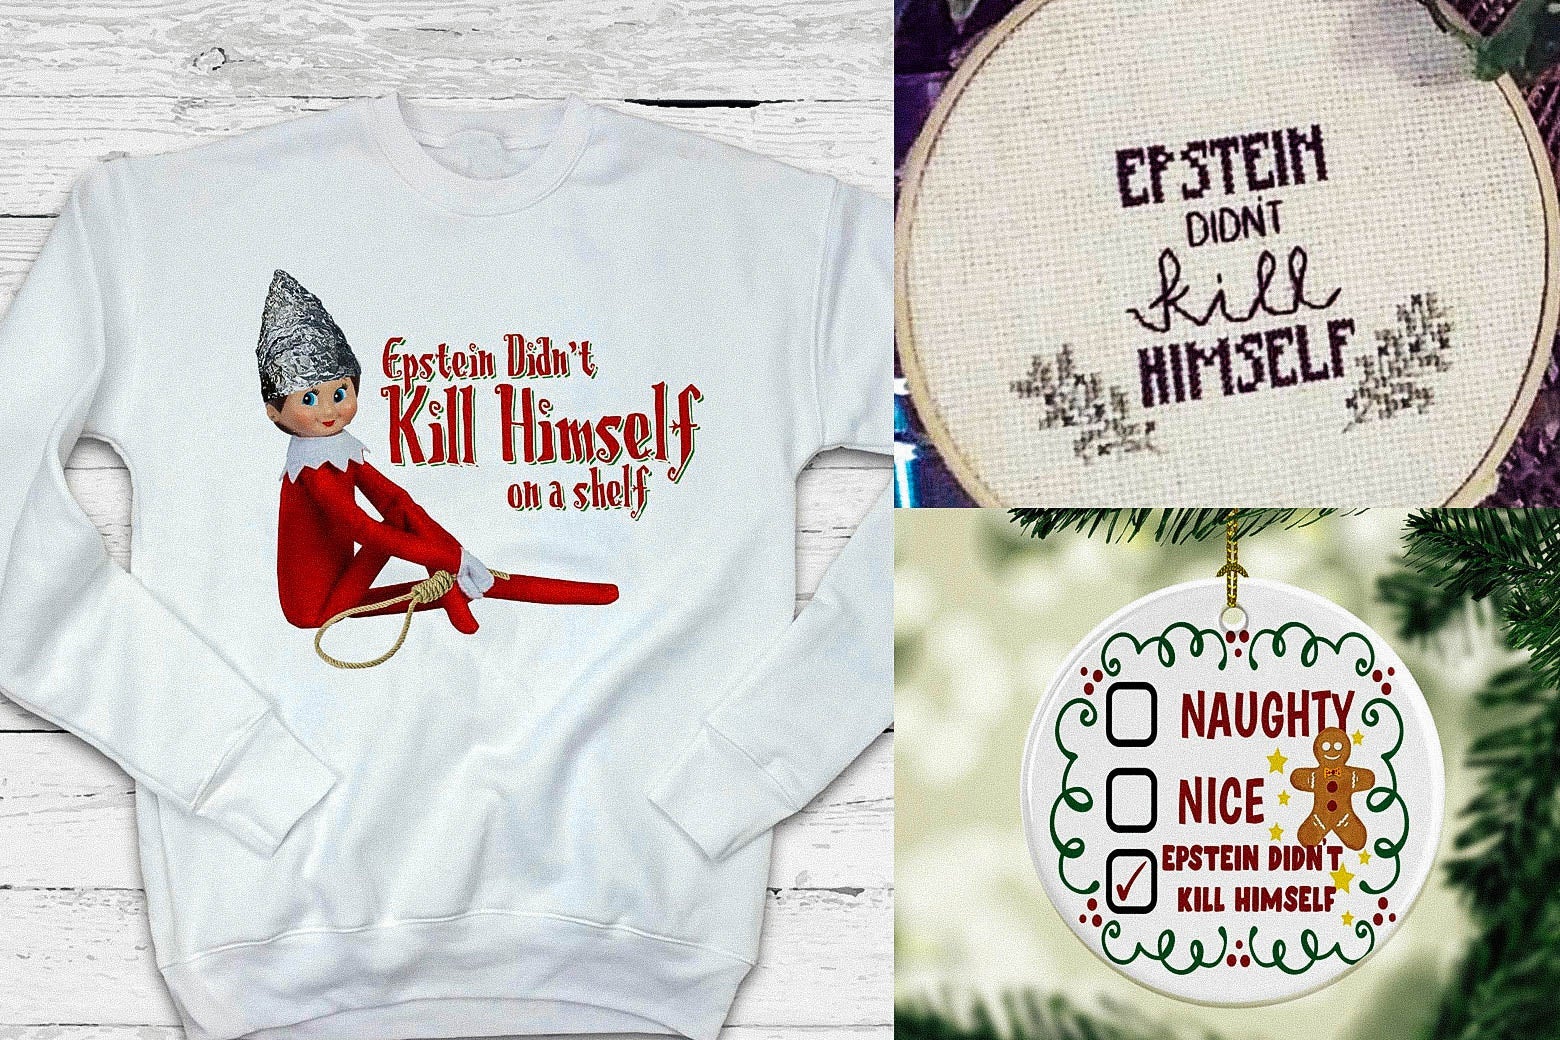 A sweatshirt, embroidered hoop, and an ornament with "Epstein didn't kill himself" slogans on them.